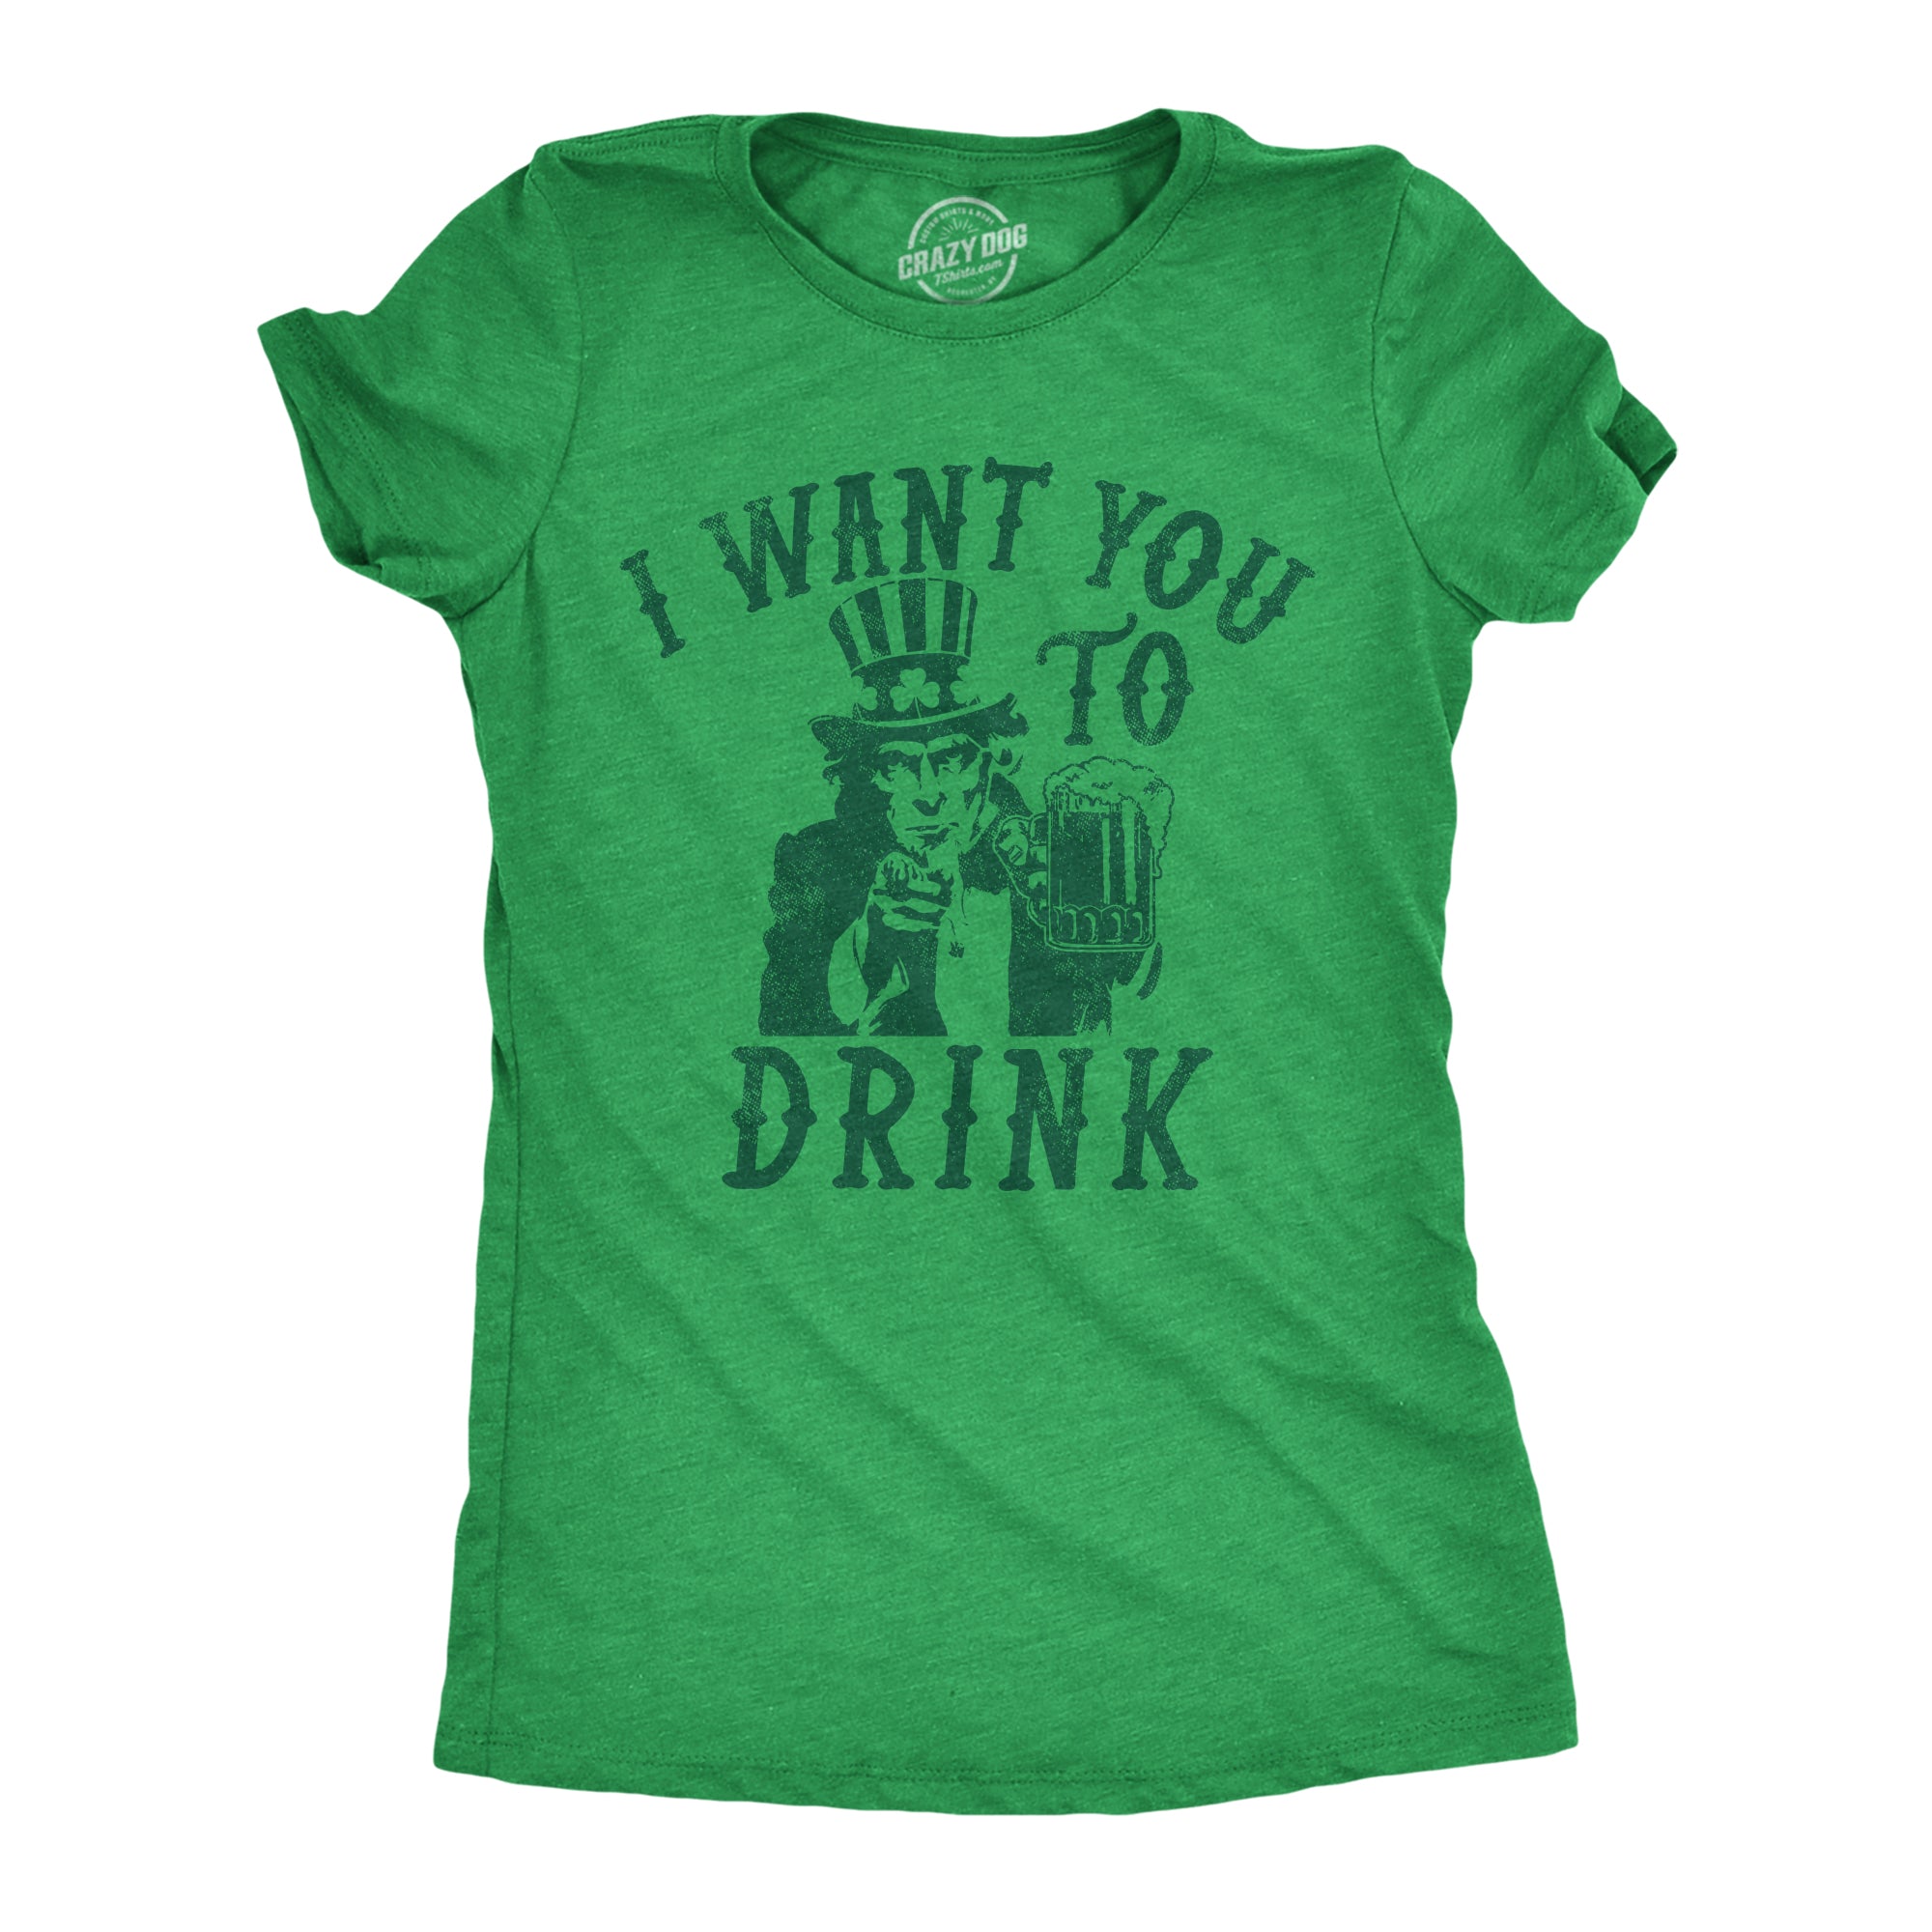 Funny Heather Green - Want You To Drink I Want You To Drink Womens T Shirt Nerdy Saint Patrick's Day Drinking Tee